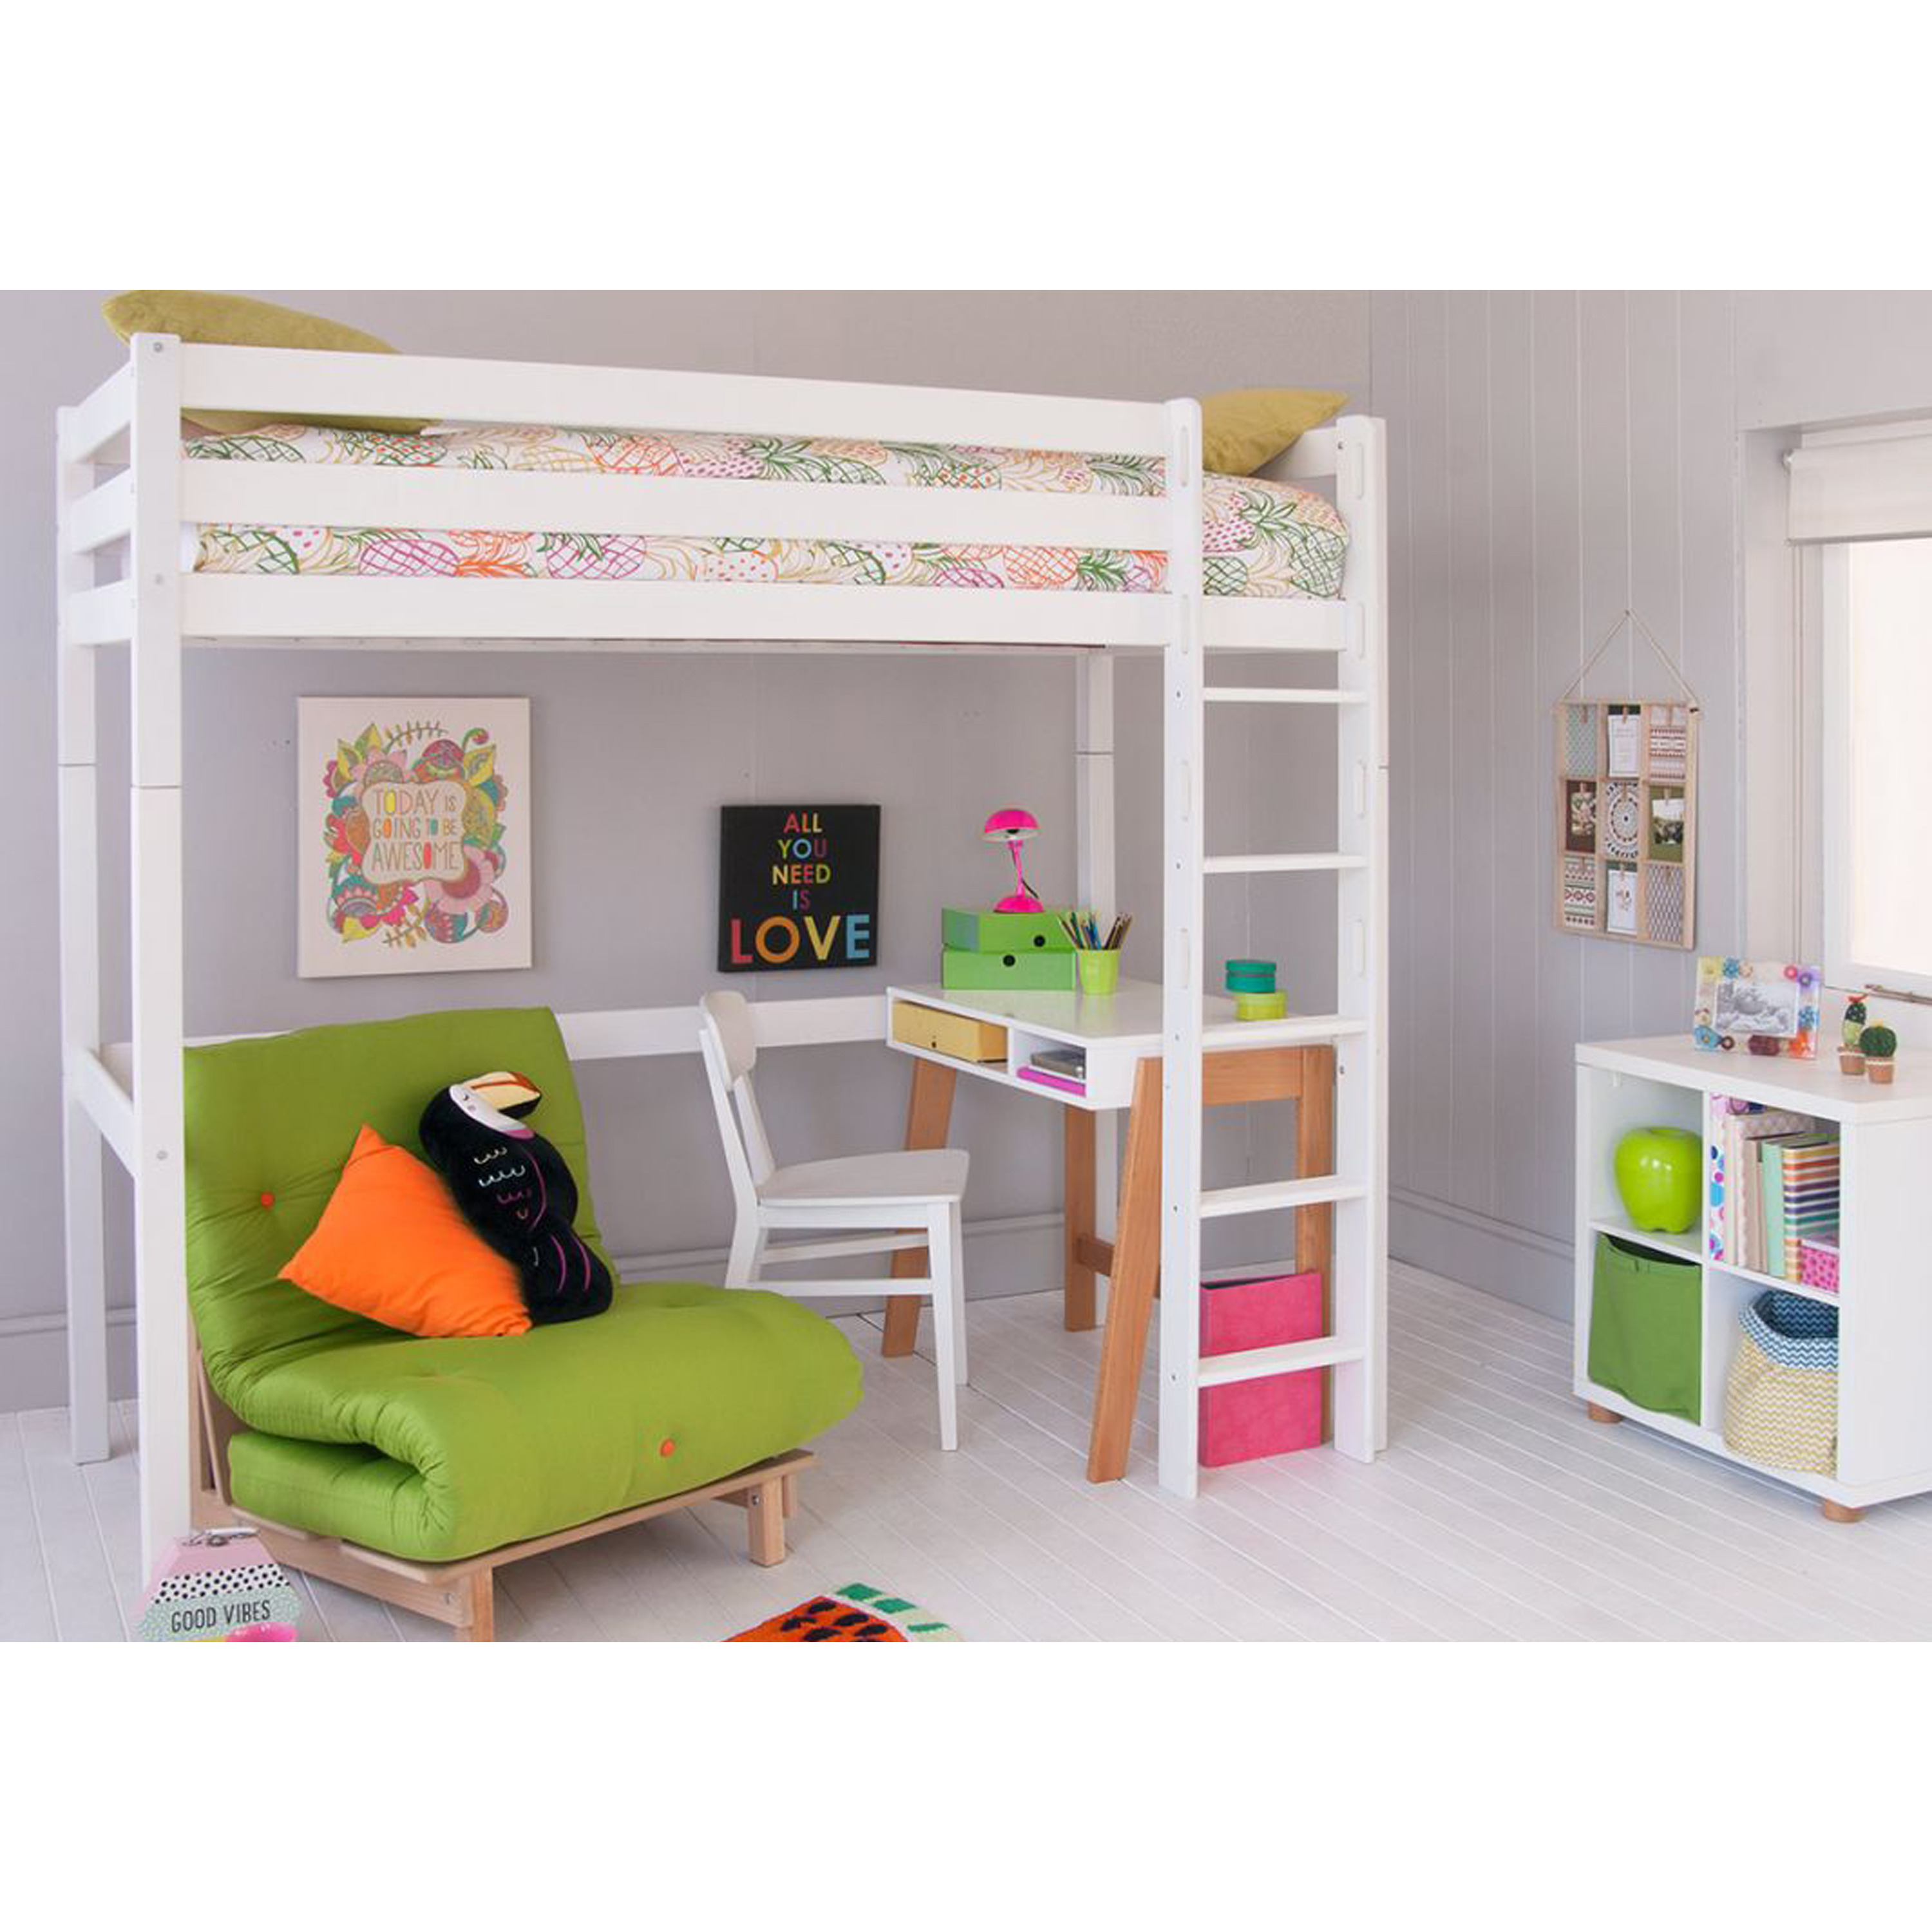 Little Folks Furniture Classic Beech High Sleeper Bed with Desk, Storage and Futon Chair Bed Lime